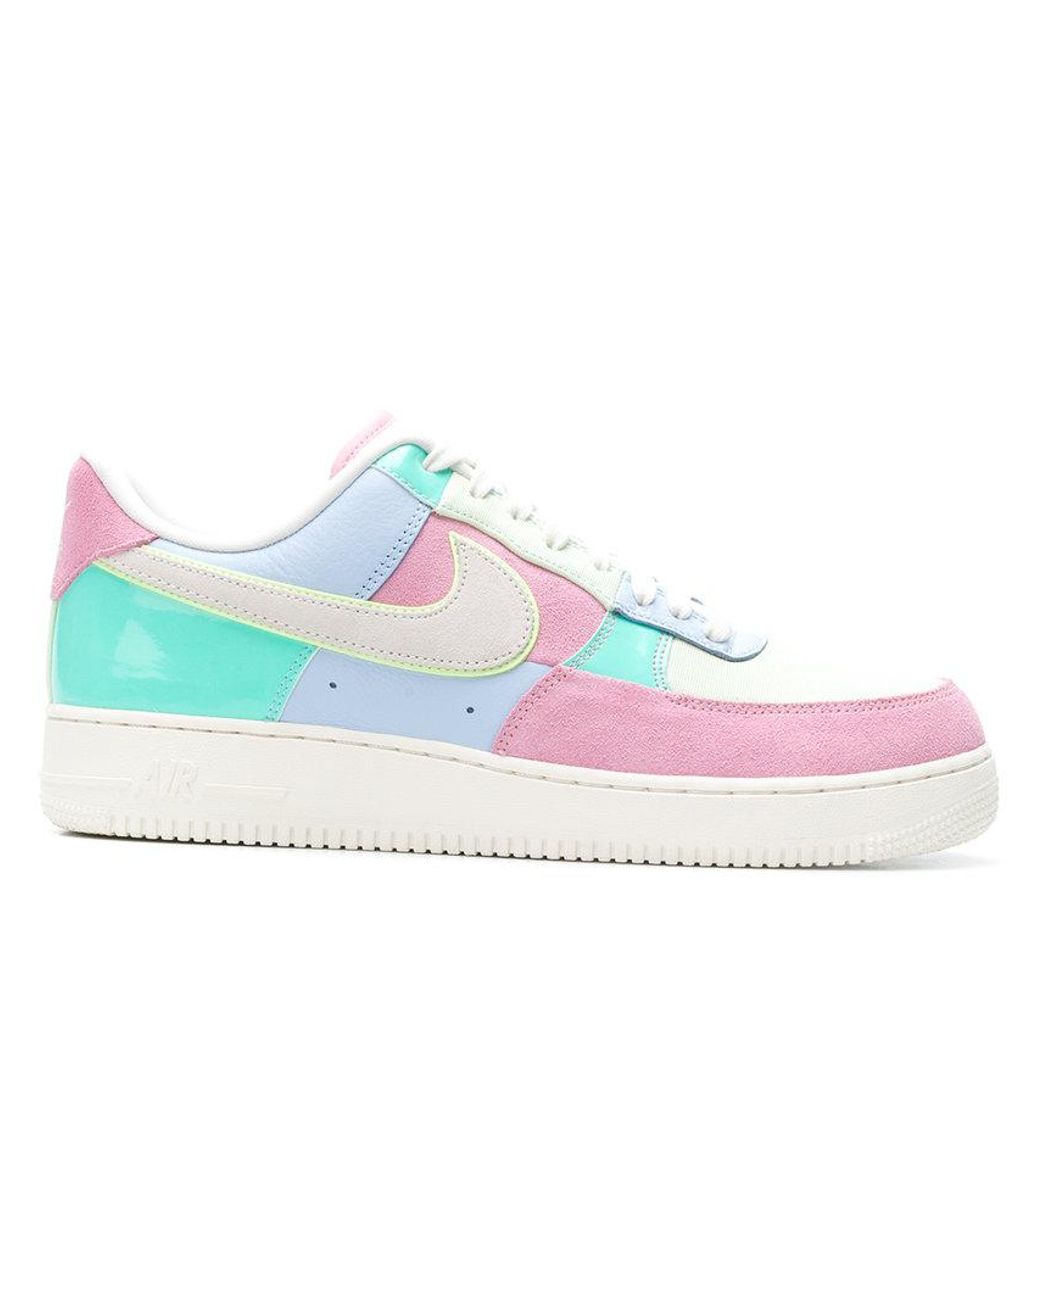 Nike Cotton Air Force 1 Easter Egg Sneakers | Lyst